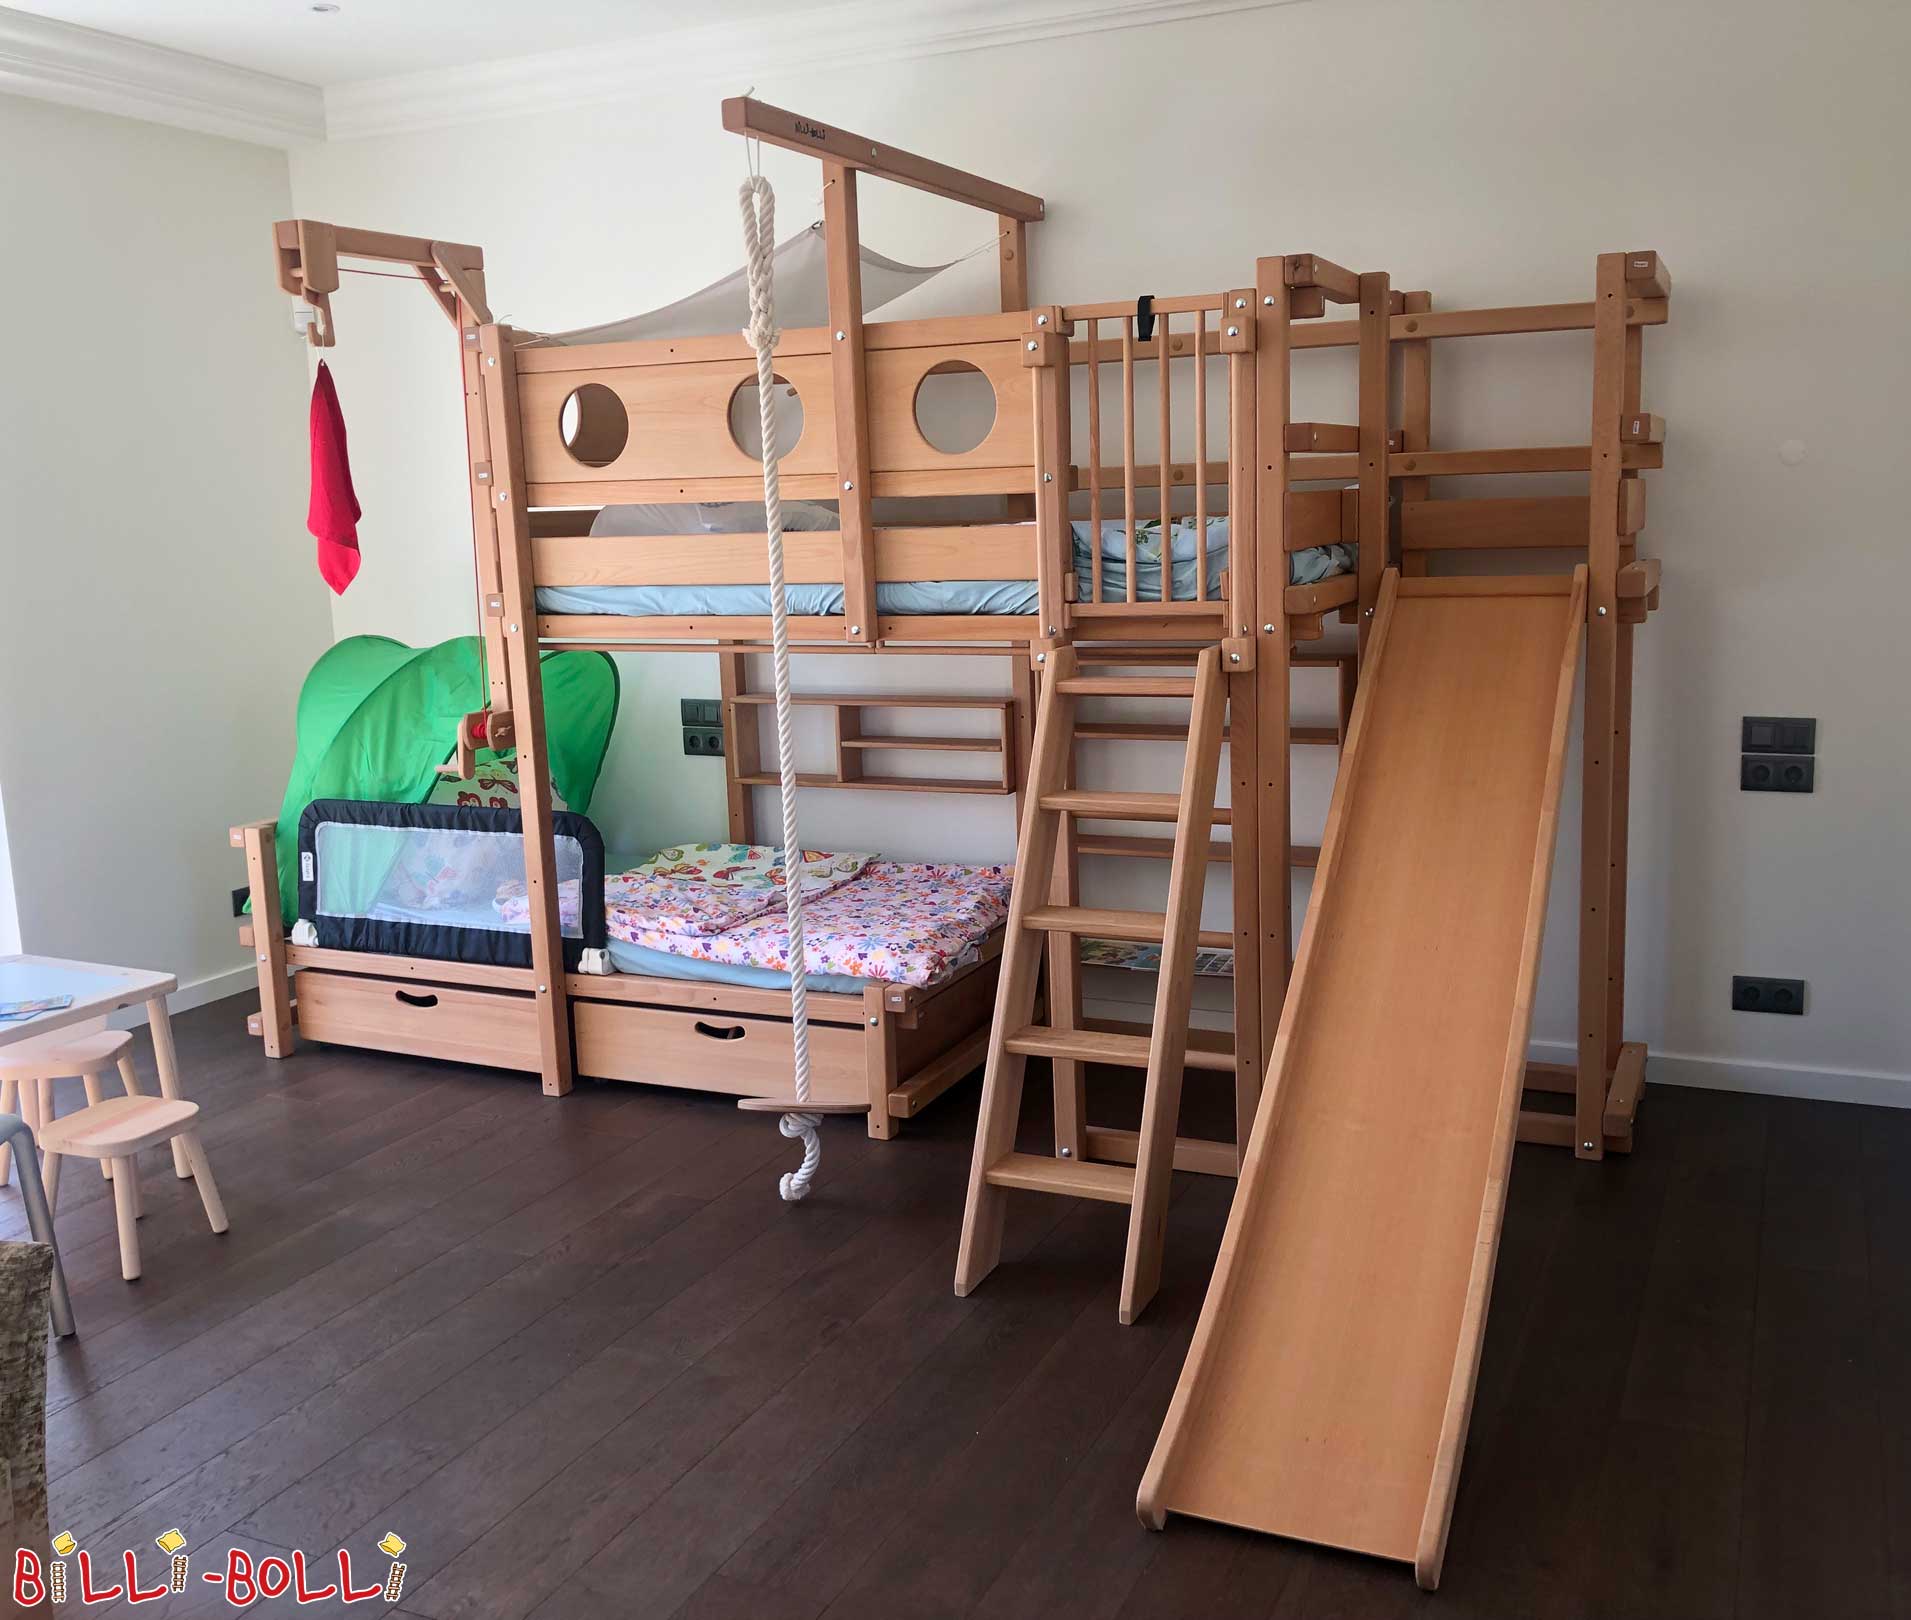 Bunk Bed Laterally Staggered, A Bunk Bed